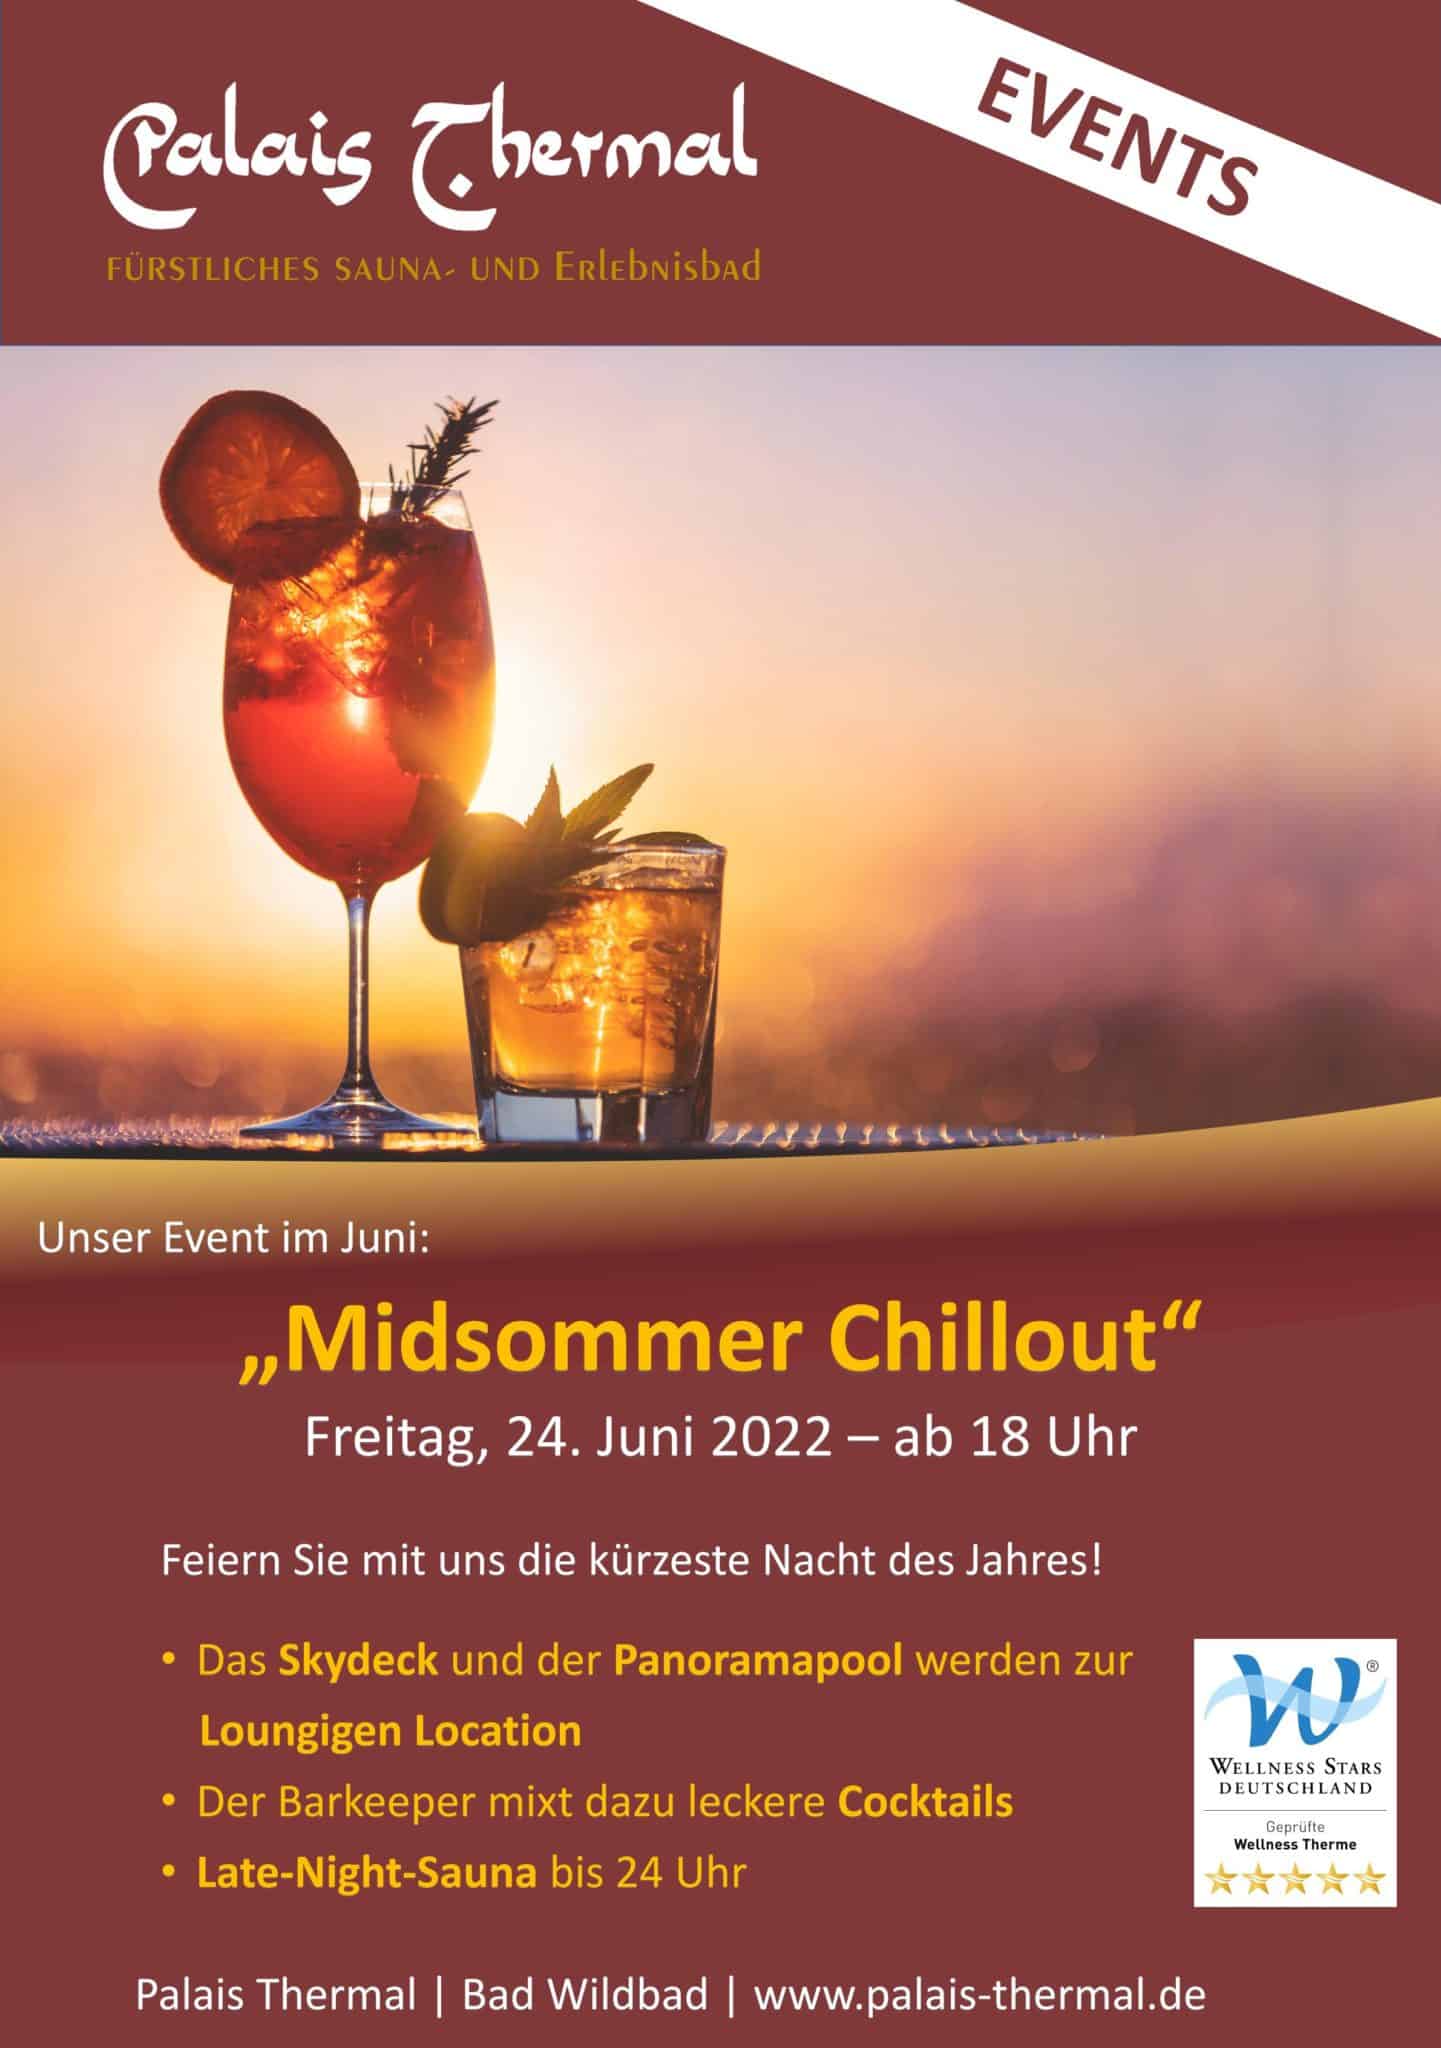 Midsummer Chillout Therme Palais Thermal